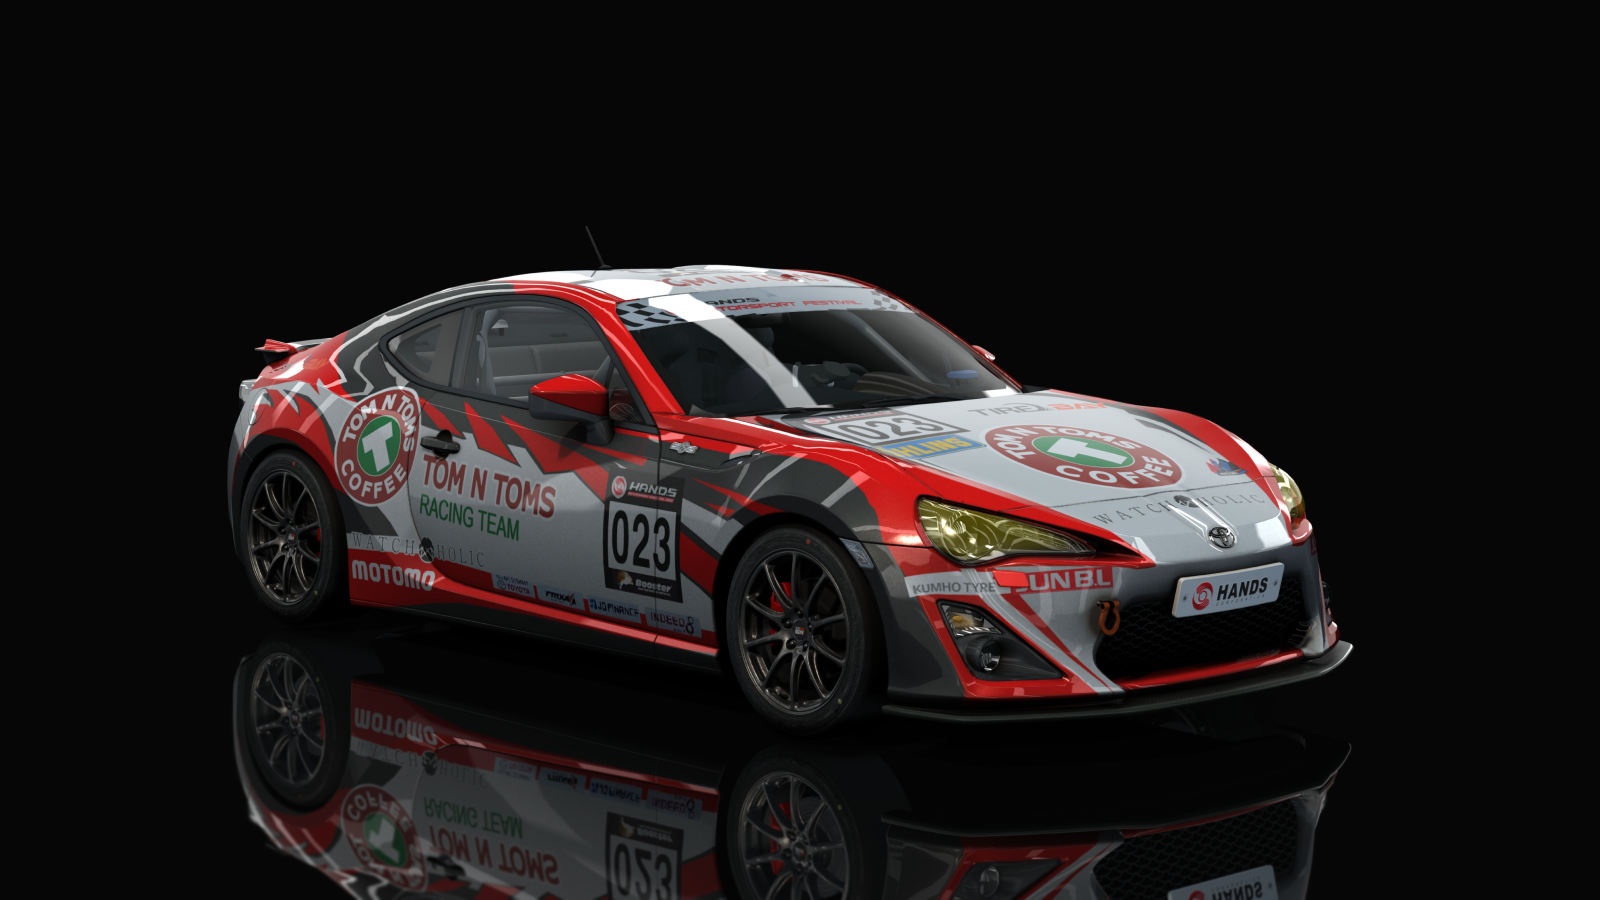 Toyota GT86 Cup, skin 023_TOMnTOMS